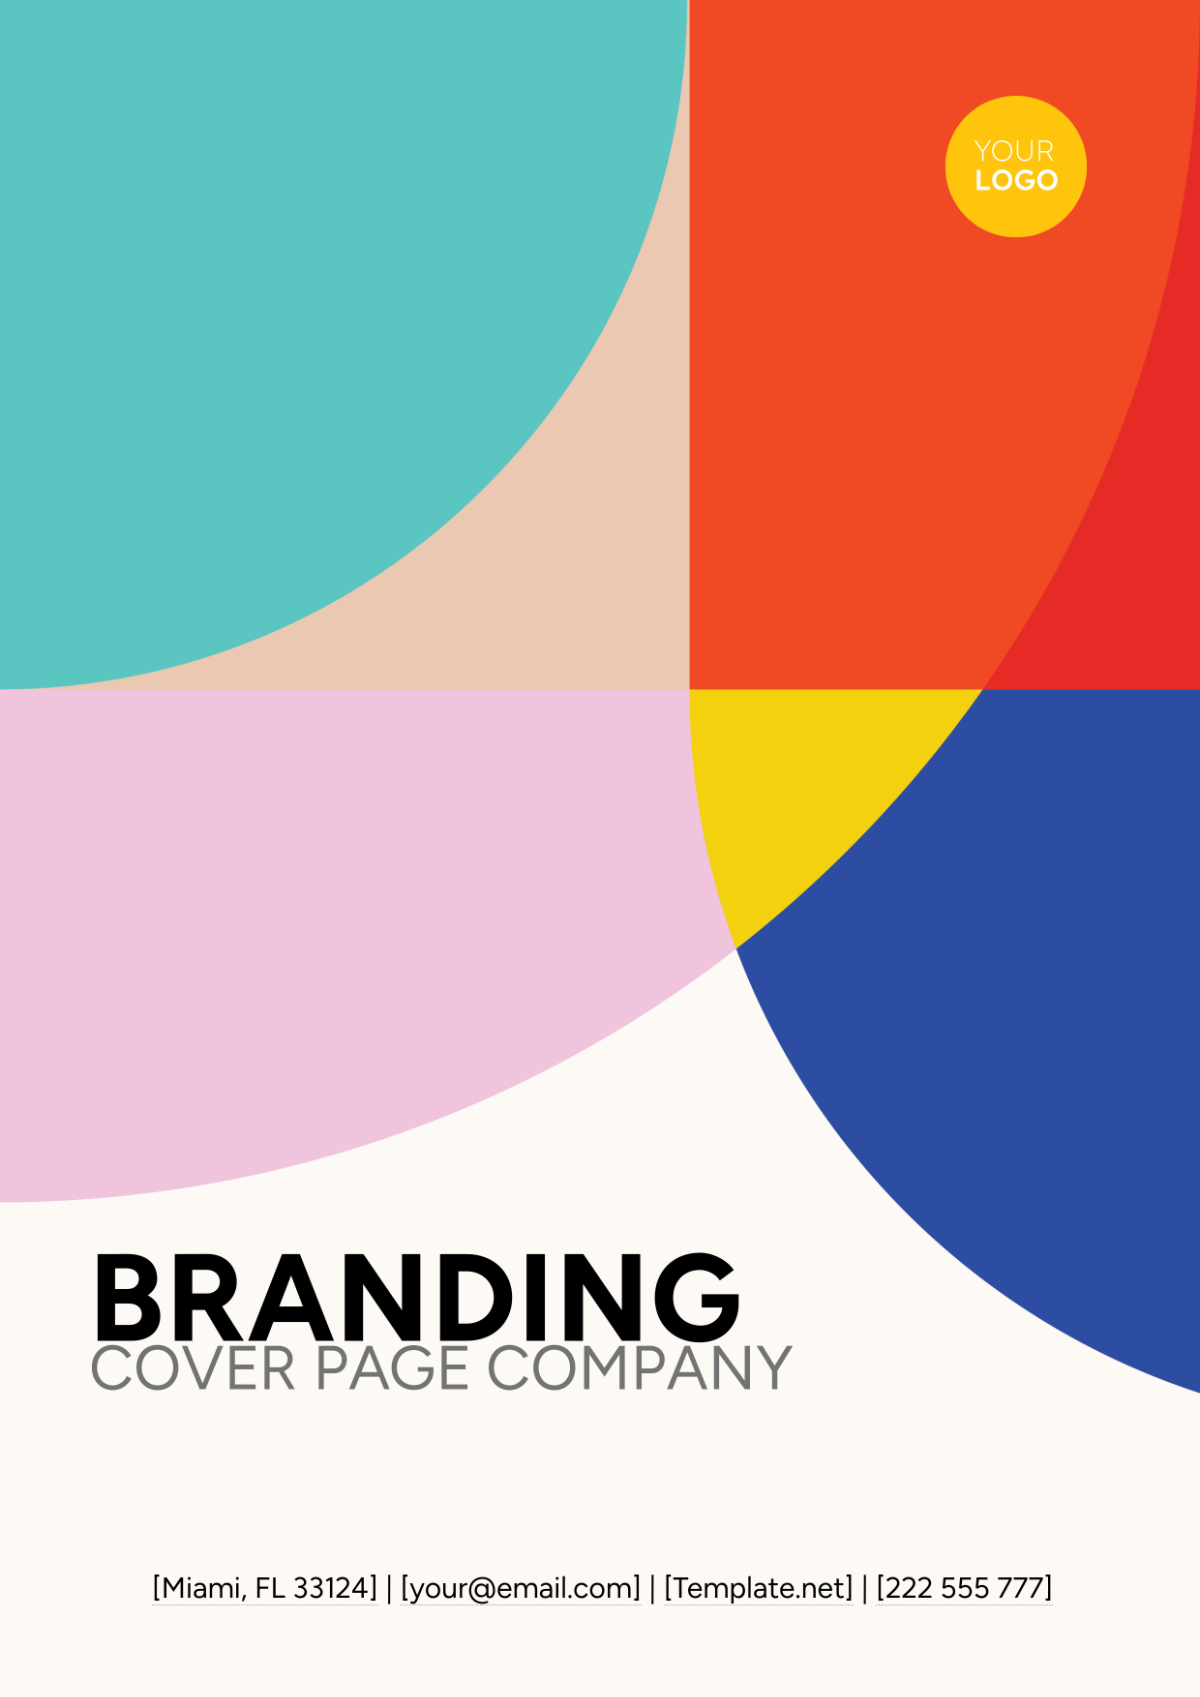 Branding Cover Page Company Template